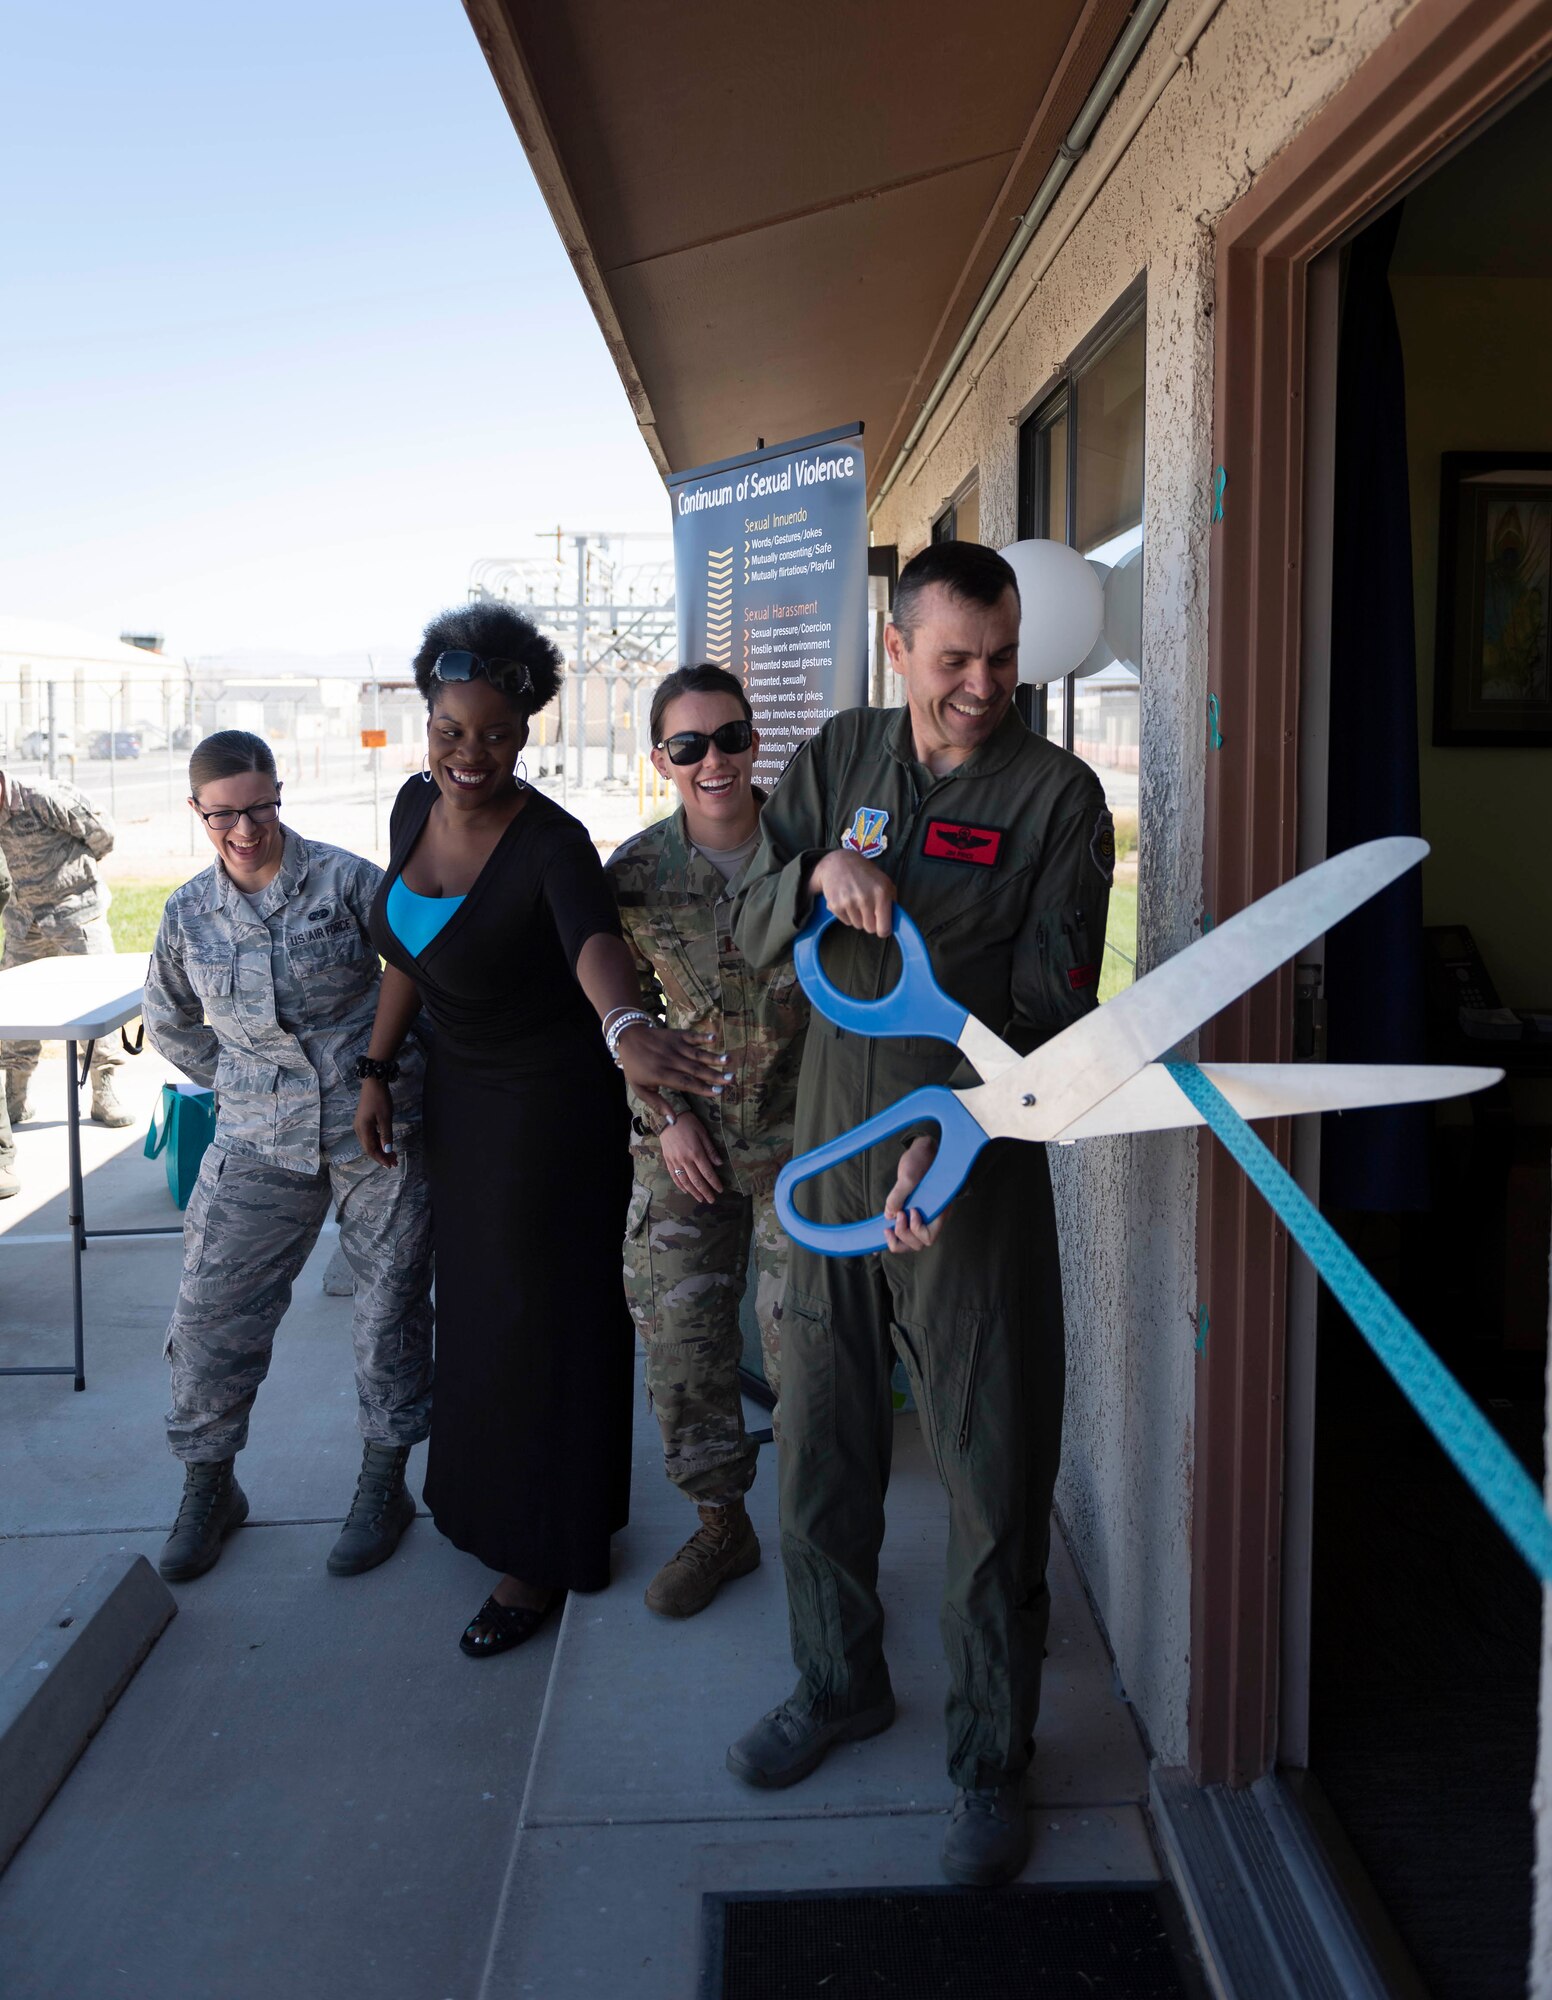 Col. James Price, 432nd Wing/432nd vice commander Air Expeditionary Wing, and SAPR personnel lead a ribbon-cutting ceremony at the new Sexual Assault Prevention and Response Office, at Creech Air Force Base, Nevada, Sept. 30, 2019. All of the same services provided at Nellis - victim advocates, referrals to mental health, counseling, medical care, special victims counsel and more are now available at Creech. (U.S. Air Force photo by Senior Airman Lauren Silverthorne)